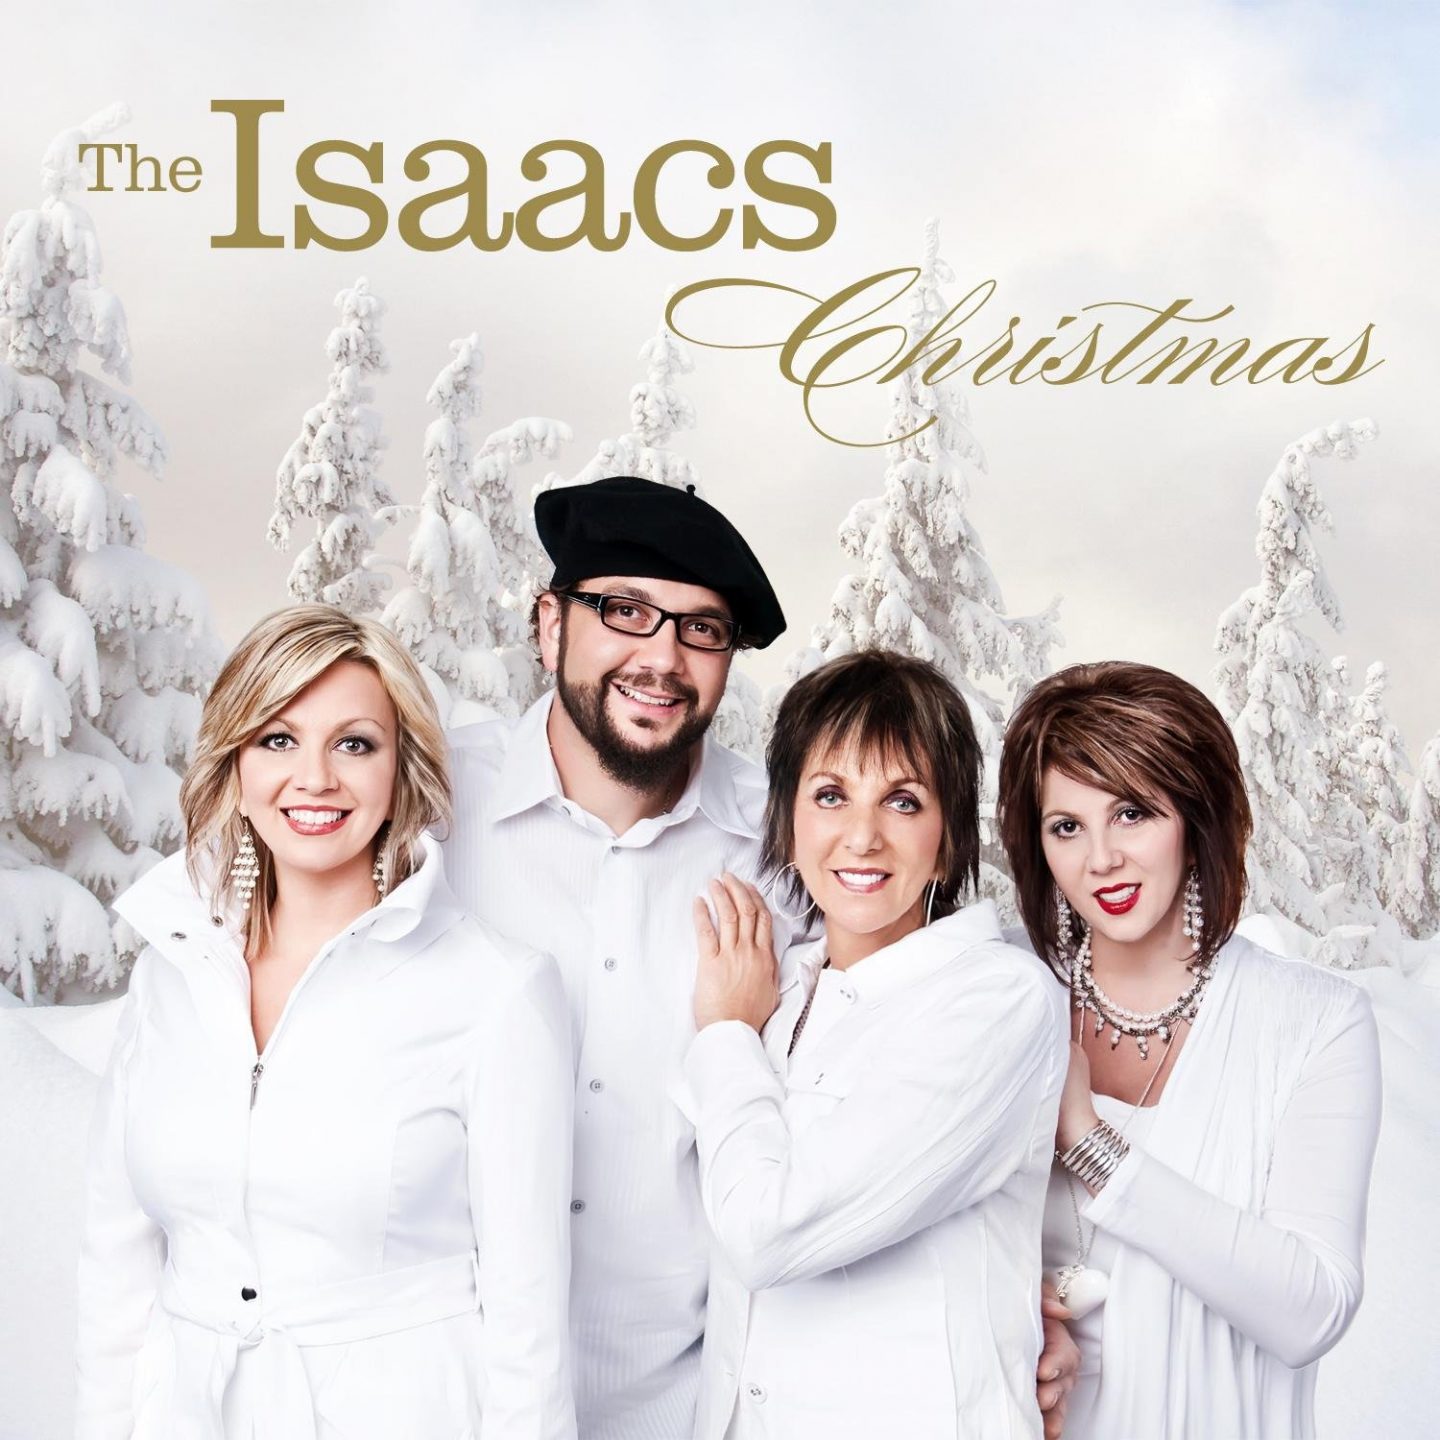 The Isaacs Gaither Music